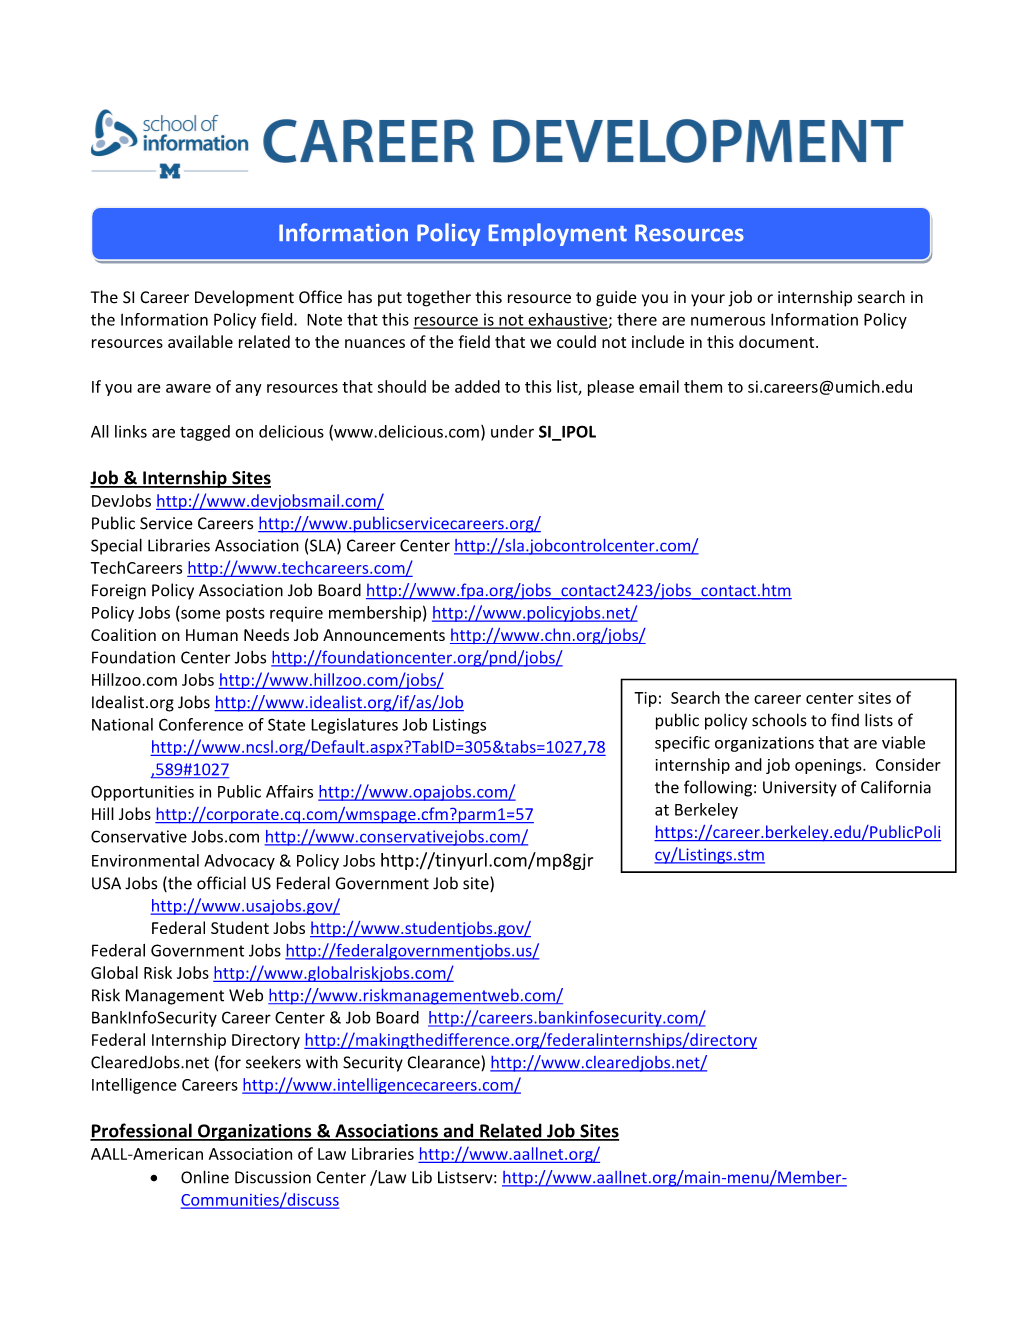 SI Career Services